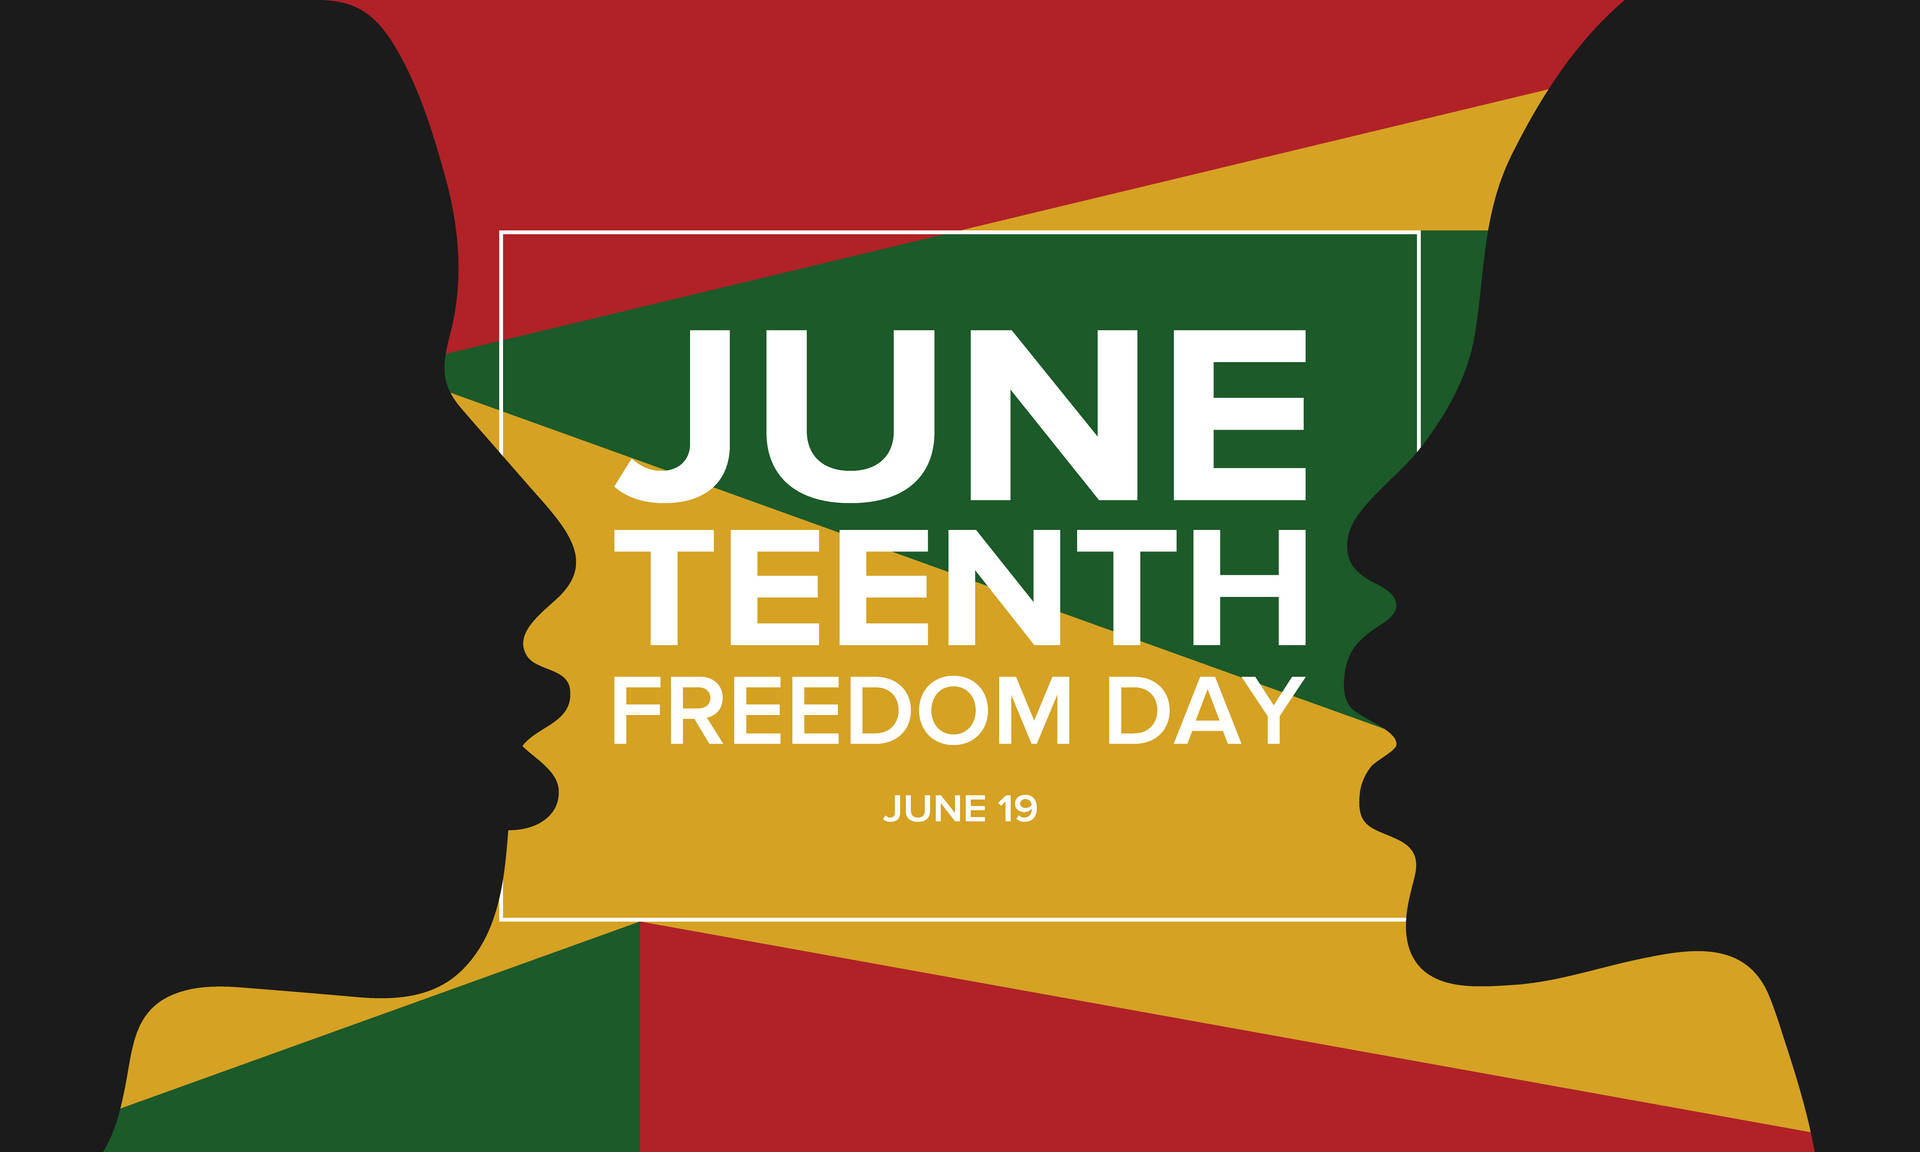 Juneteenth With Human Faces Silhouettes Background